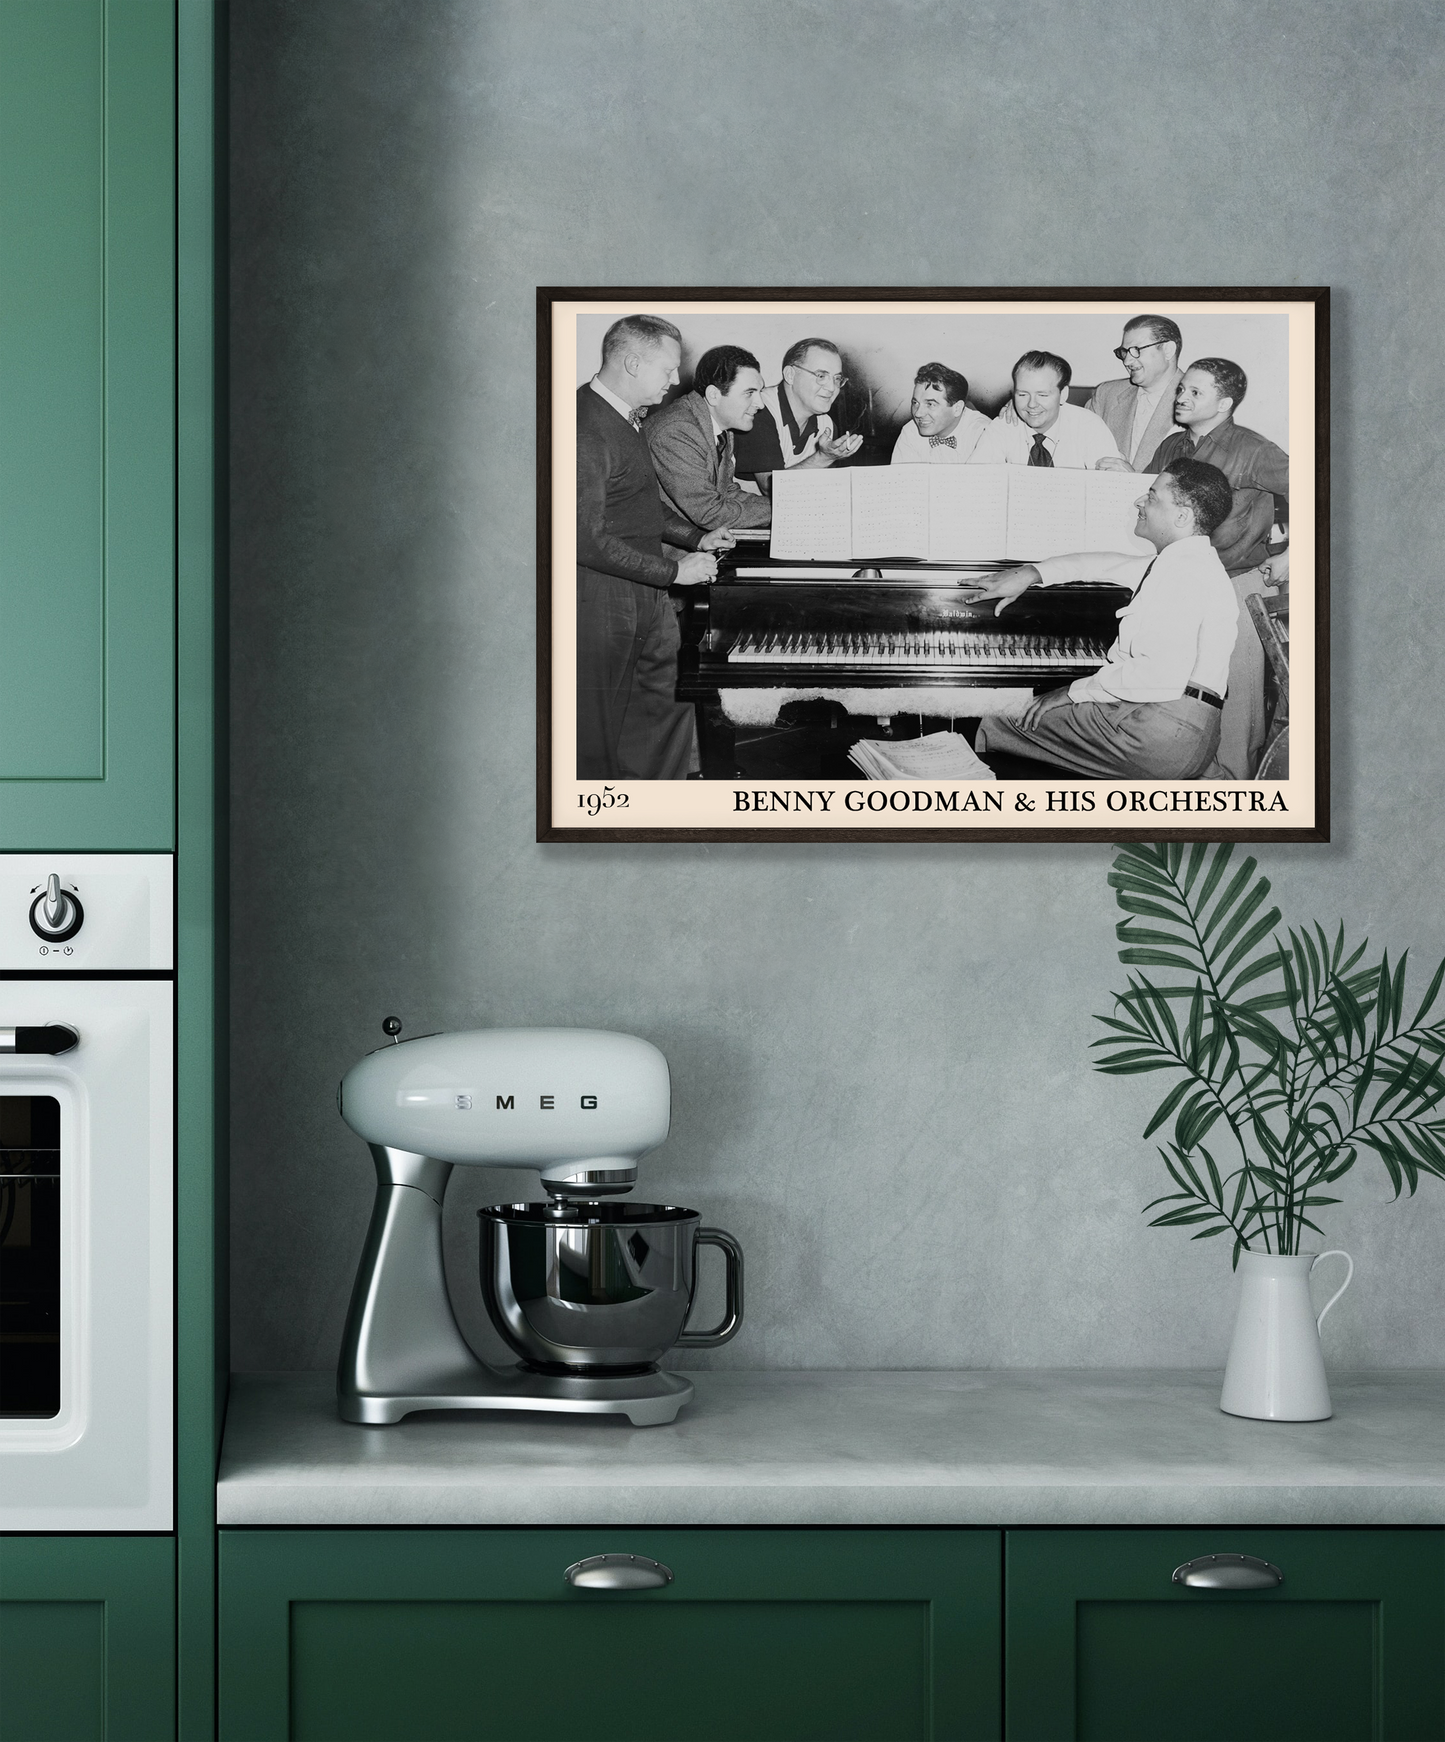 1952 photograph of Benny Goodman & his orchestra crafted into a cool black framed music poster. The poster is hanging on a green kitchen wall